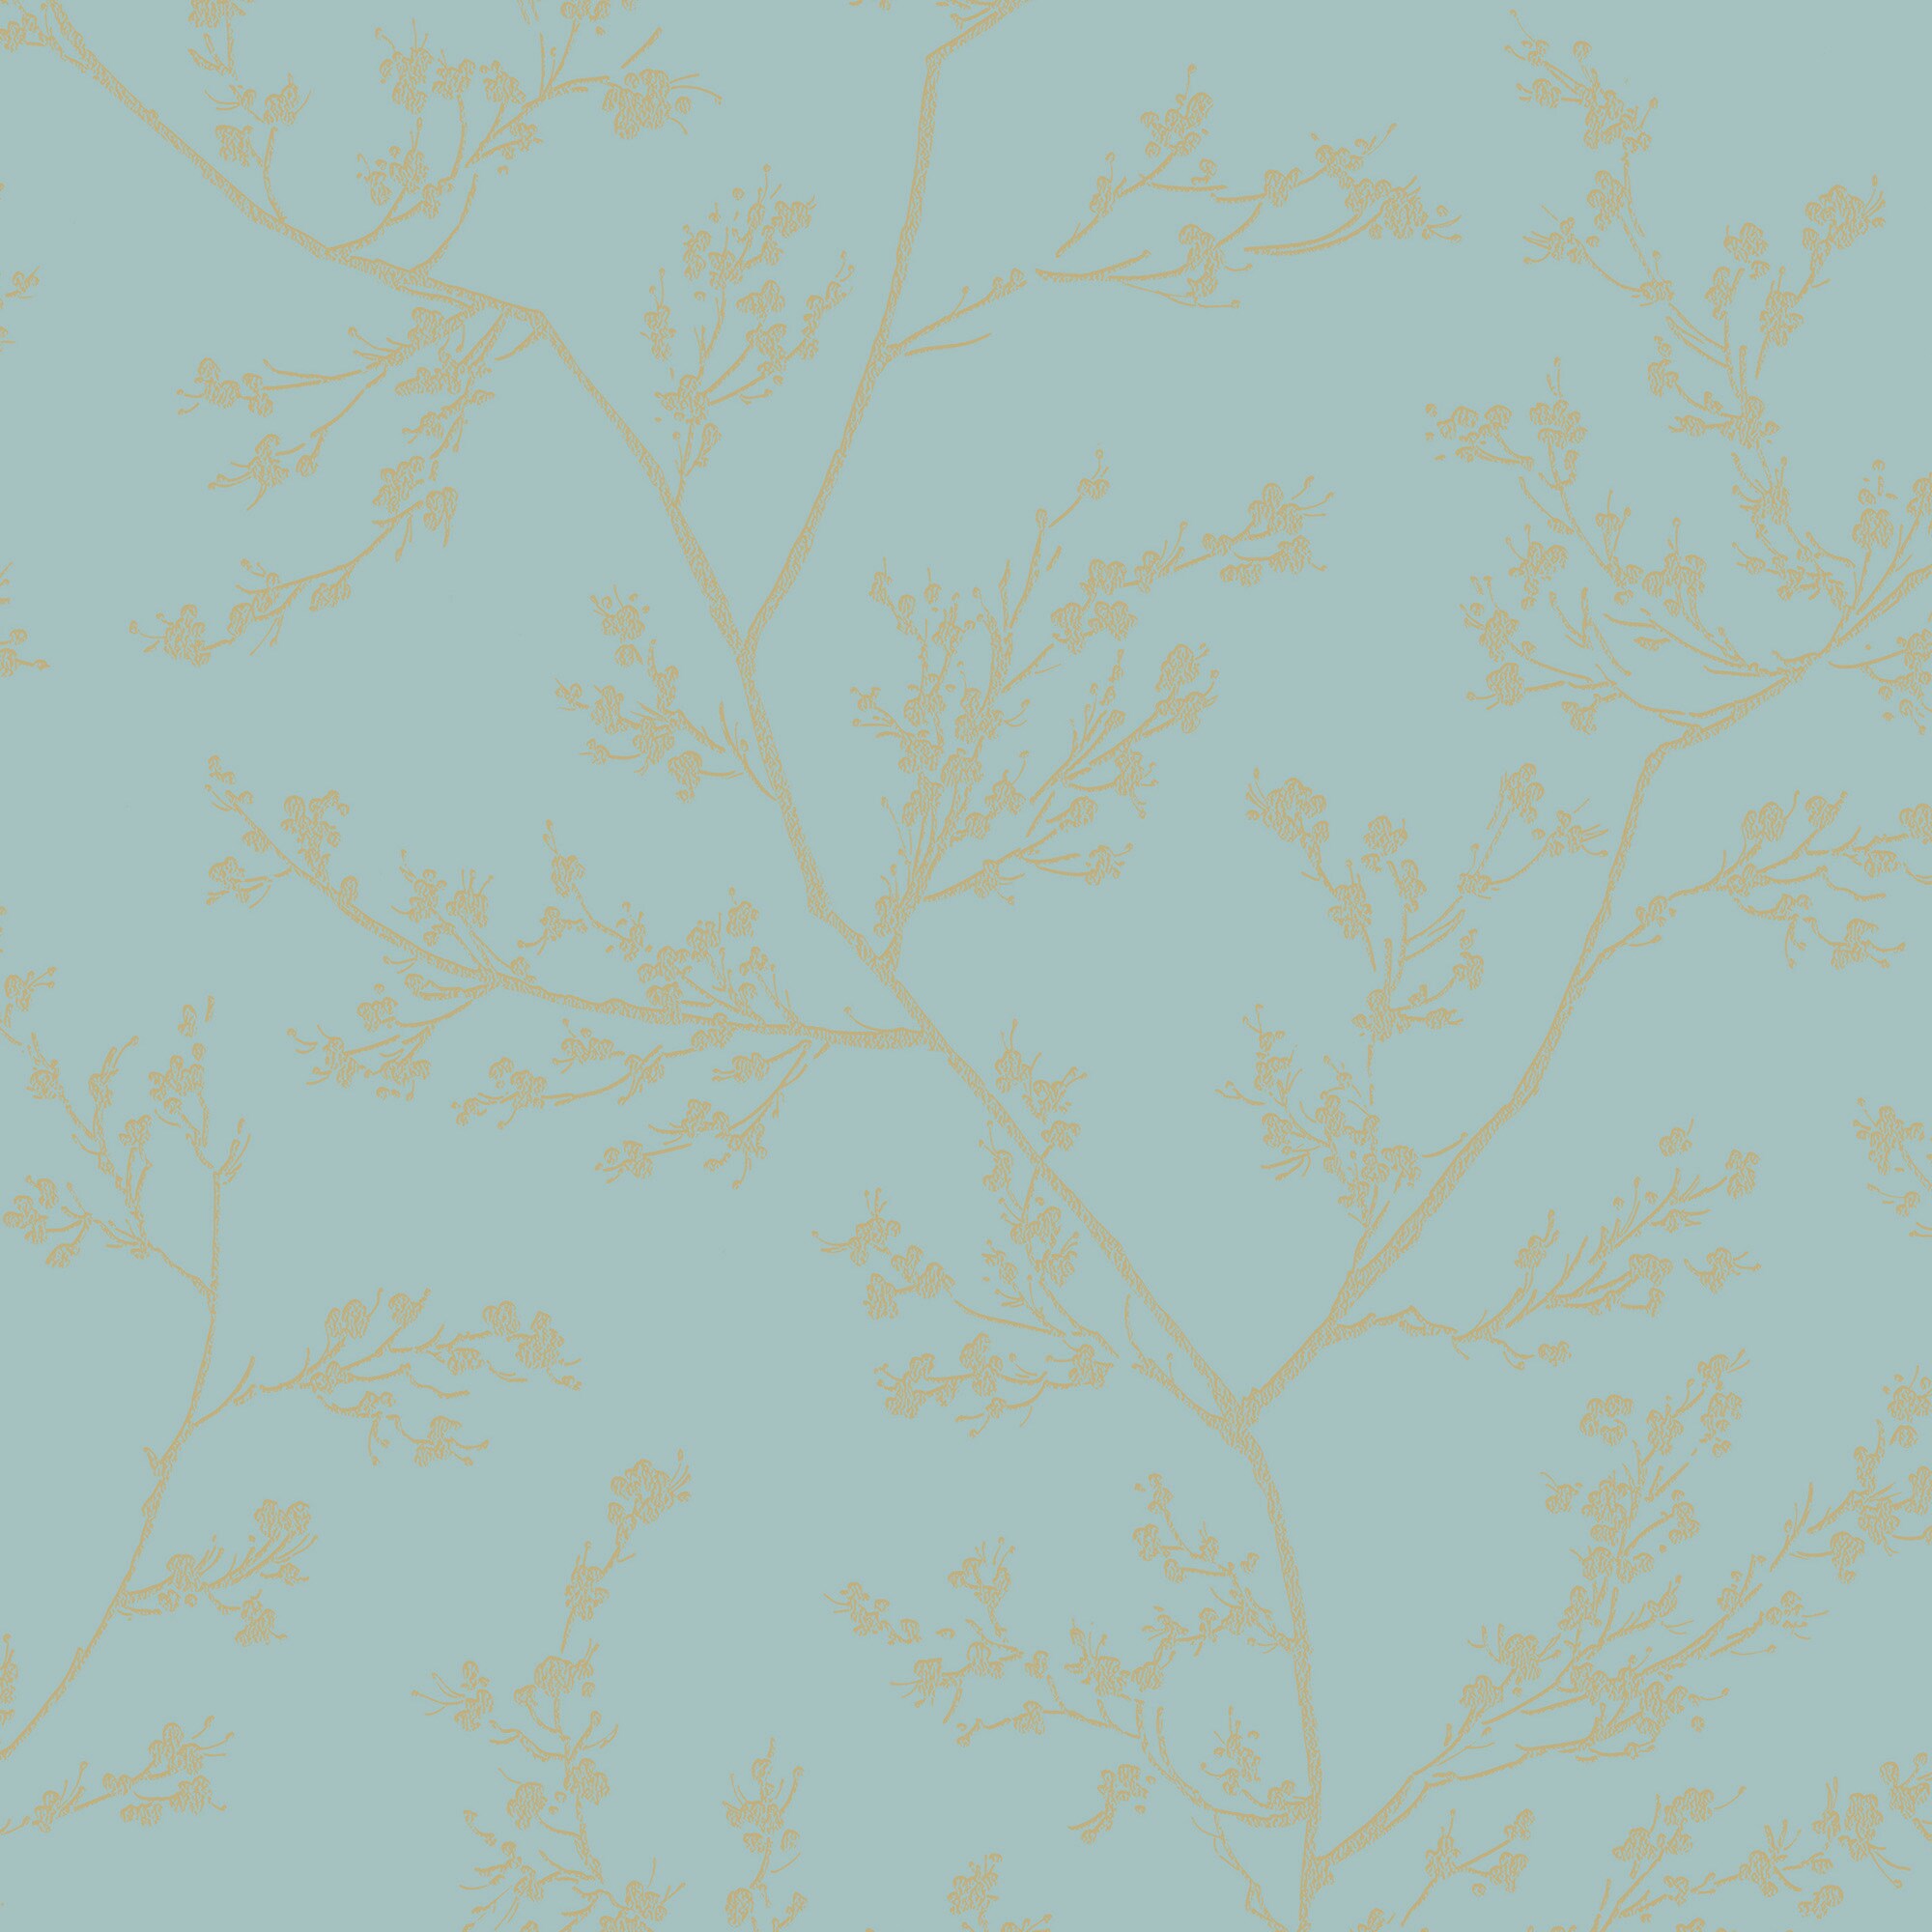 Graham & Brown G B AQUA AND GOLD SPRINGTIME WP In The Wallpaper Department At Lowes.com